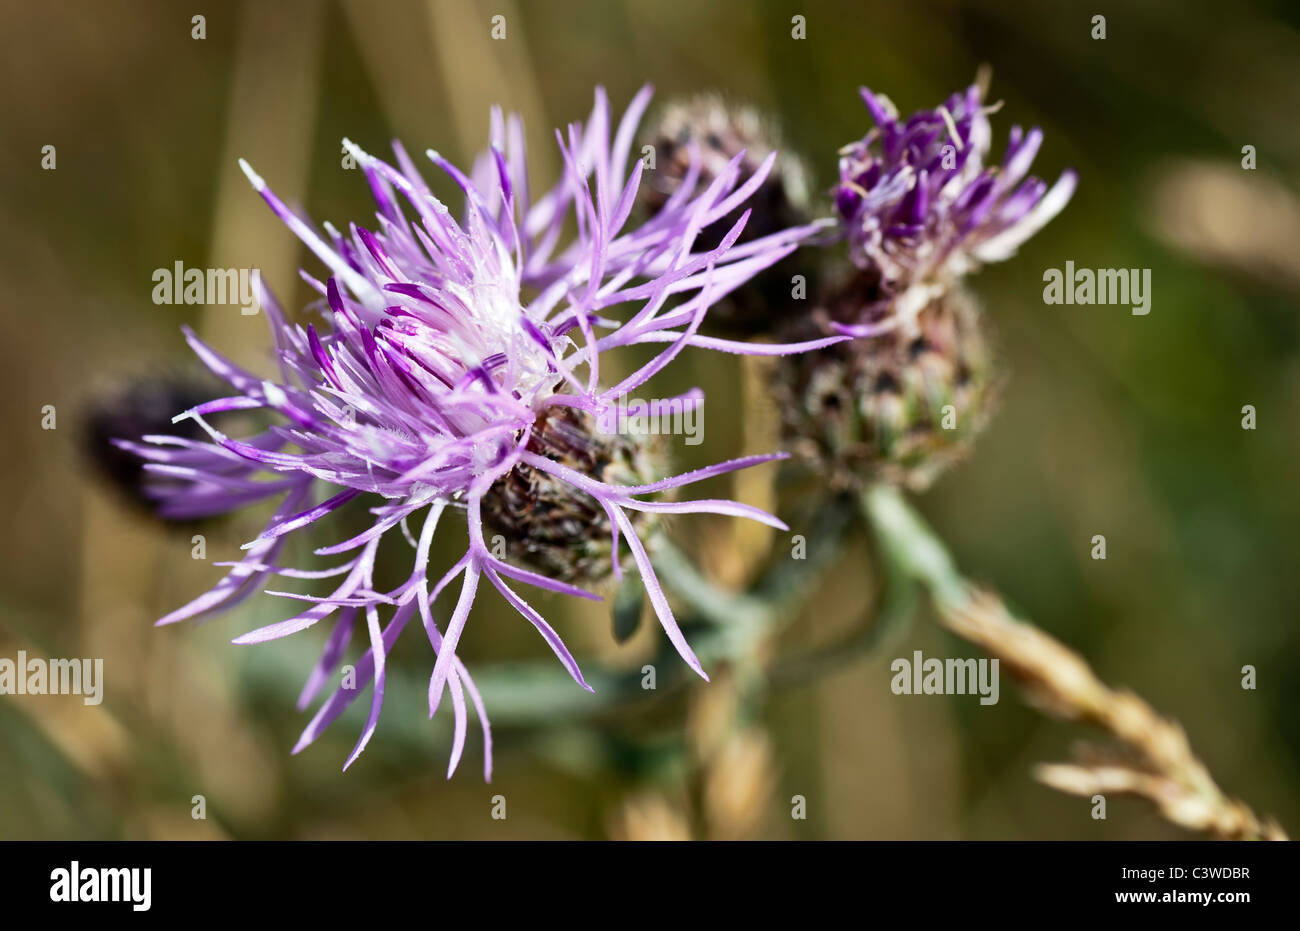 The purple flower of a spotted knapweed (Centaurea maculosa). This noxious weed was found on Mt. Jumbo in Missoula, Montana. Stock Photo